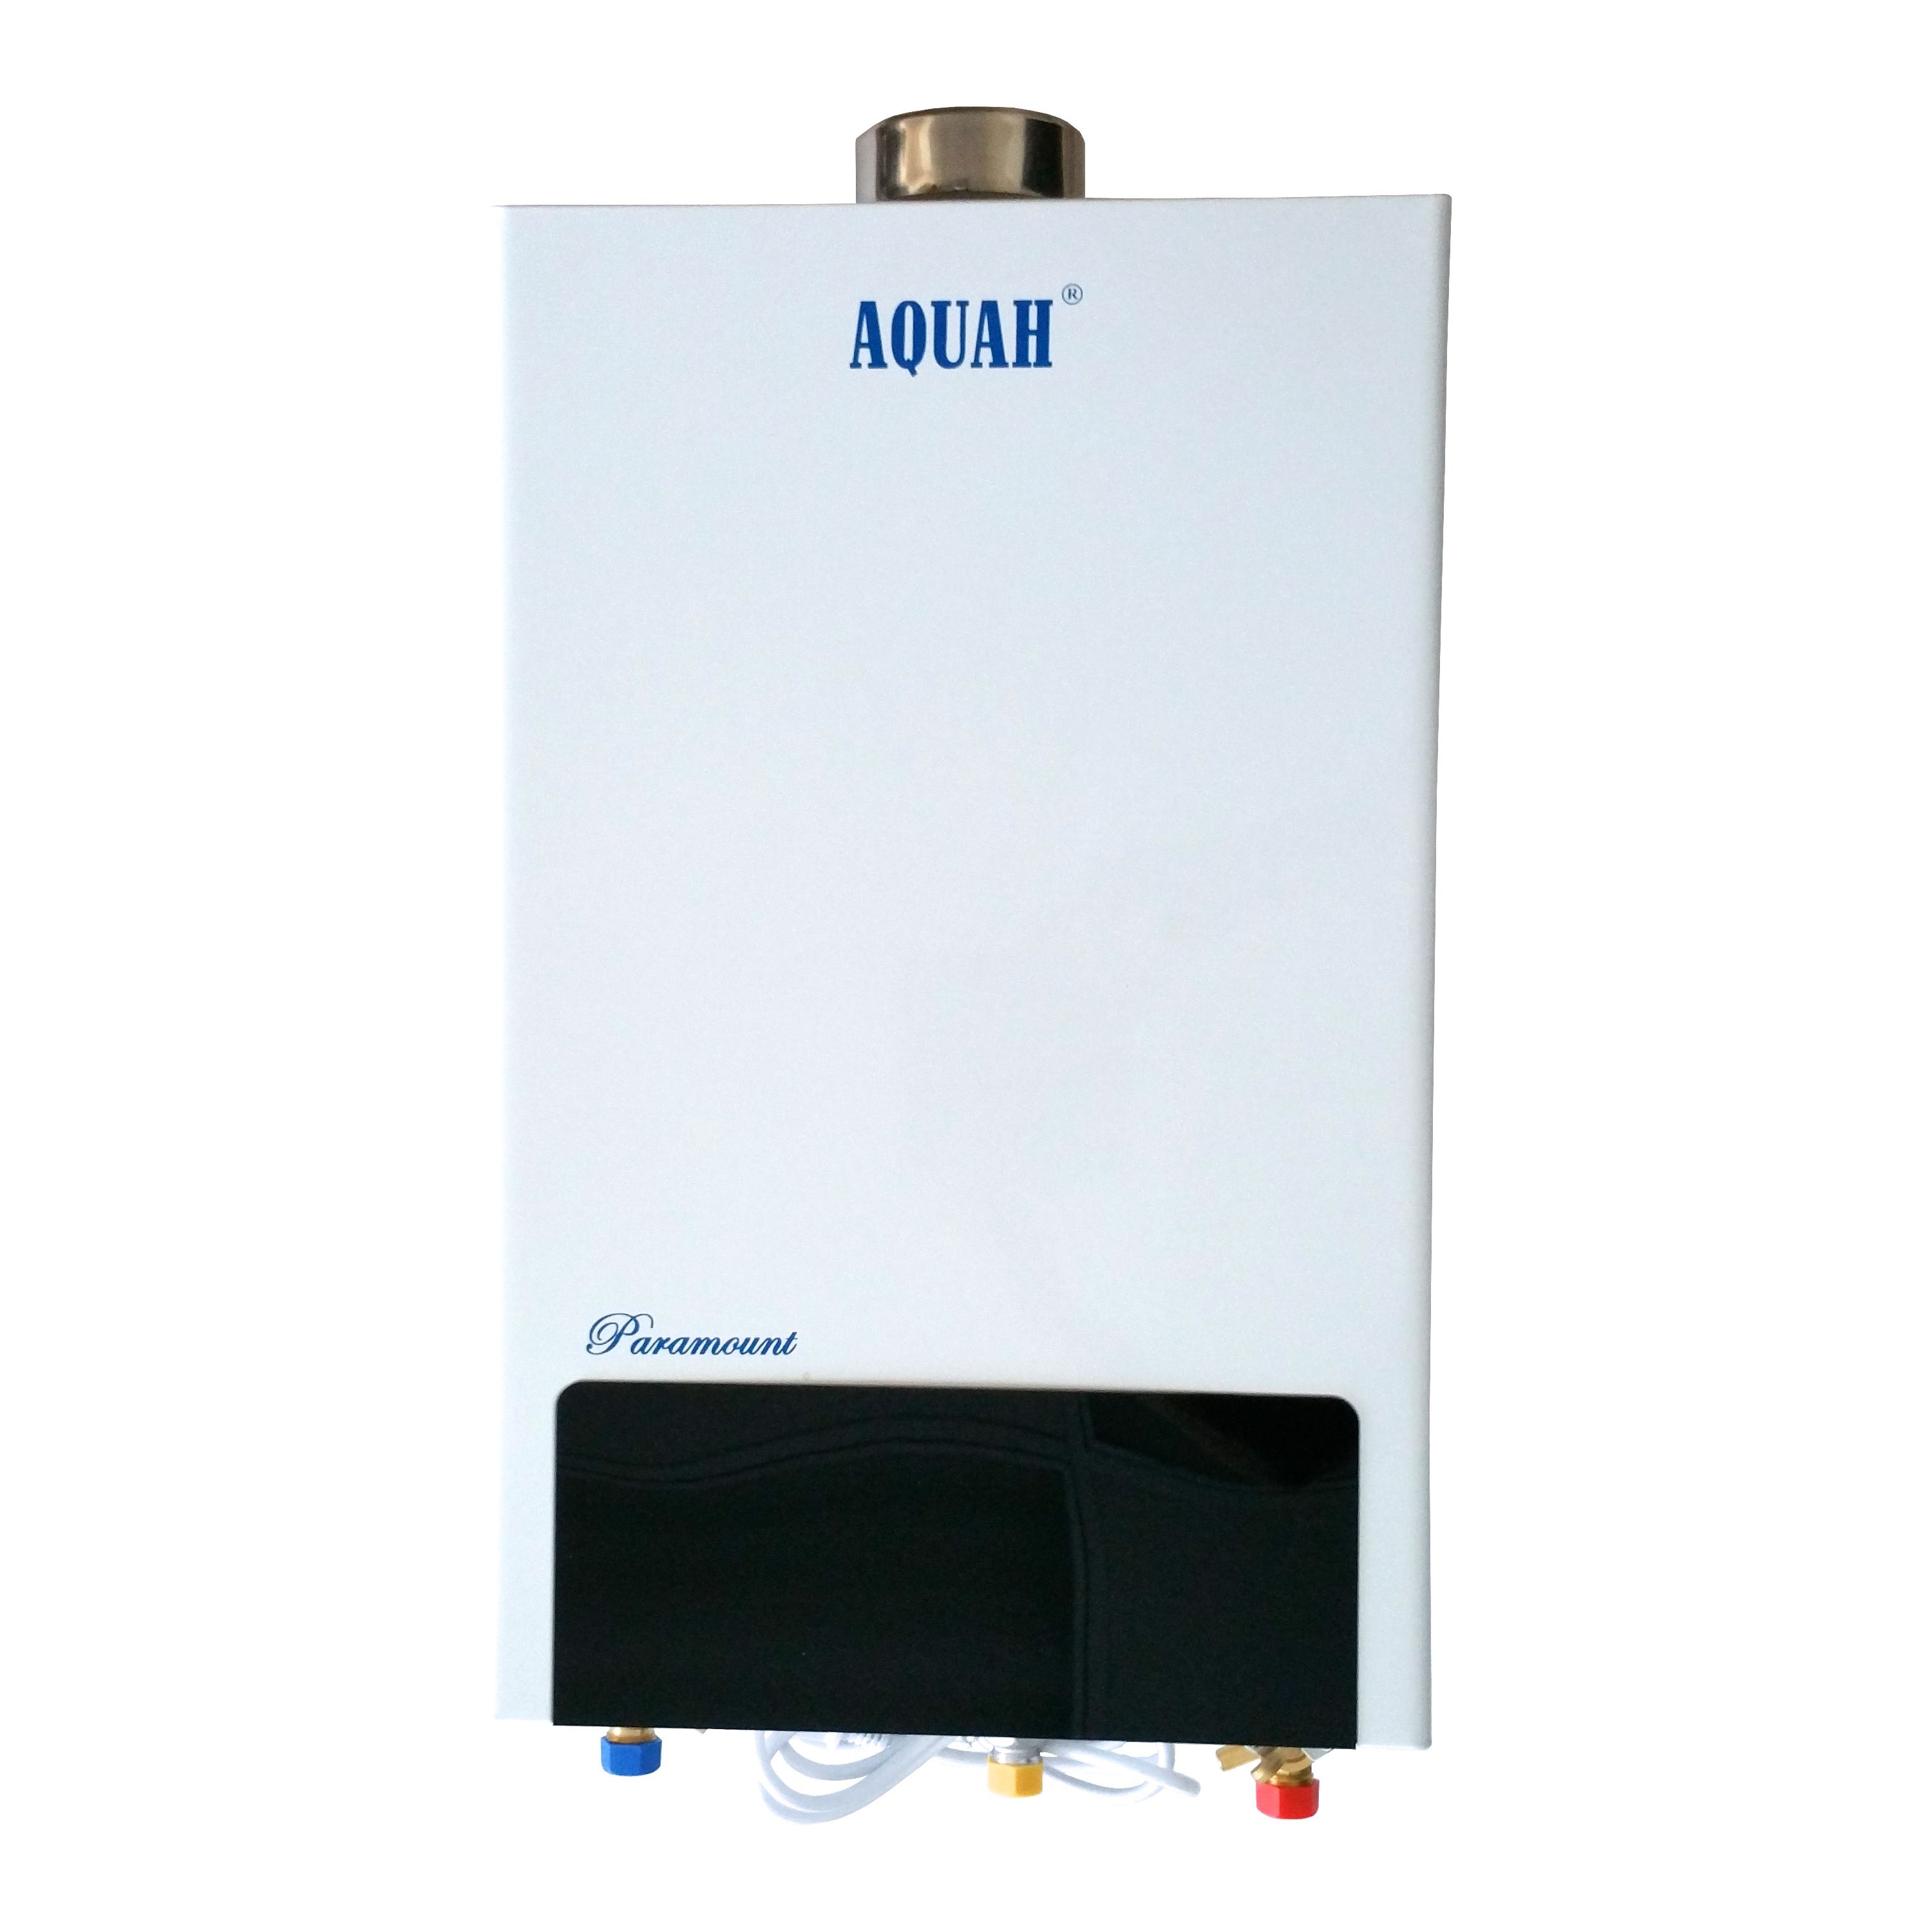 AQUAH PARAMOUNT DIRECT VENT NATURAL GAS TANKLESS WATER HEATER